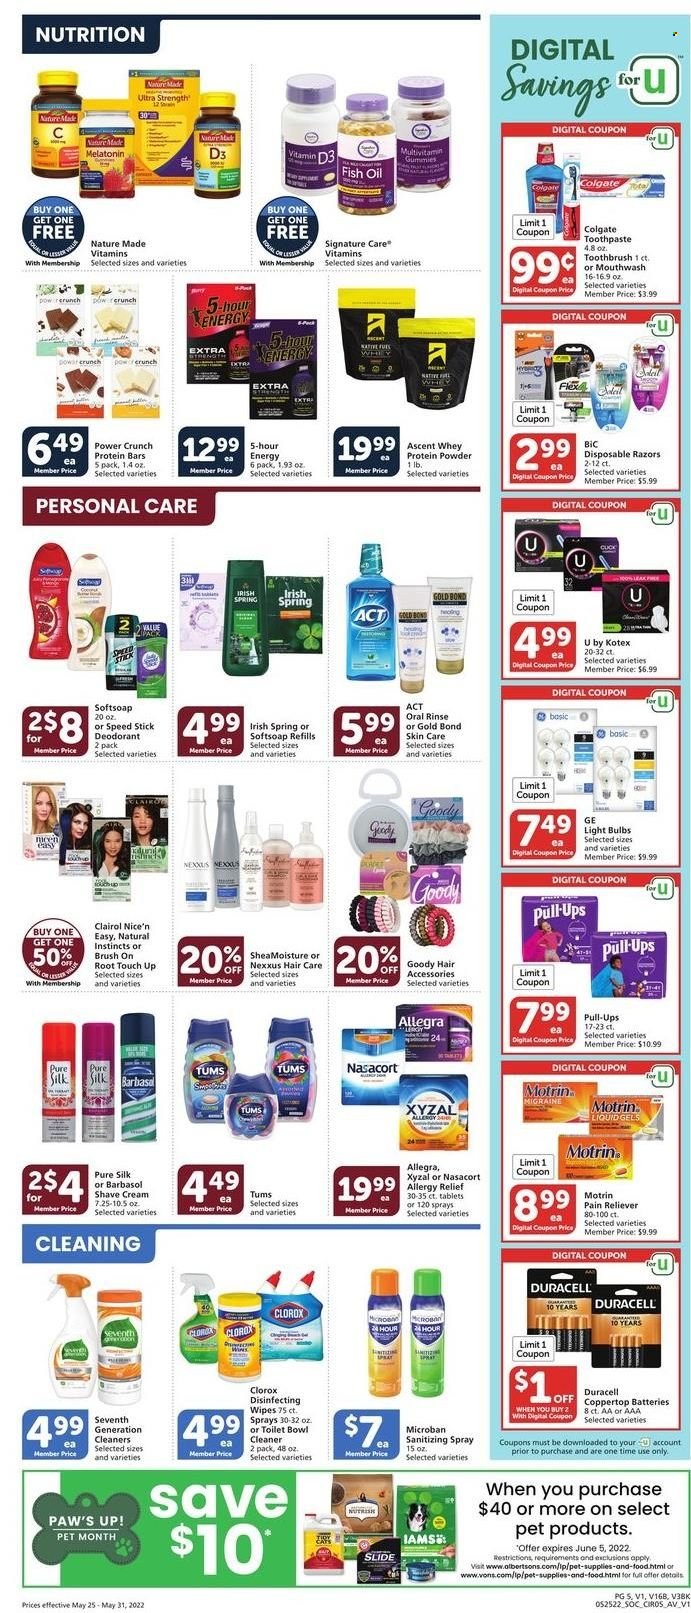 thumbnail - Albertsons Flyer - 05/25/2022 - 05/31/2022 - Sales products - protein bar, oil, wipes, cleaner, Clorox, Softsoap, Colgate, toothbrush, toothpaste, mouthwash, Kotex, Clairol, Nexxus, anti-perspirant, Speed Stick, deodorant, BIC, Barbasol, shave cream, disposable razor, battery, bulb, Duracell, light bulb, Iams, Nutrish, toys, fish oil, Melatonin, multivitamin, Nature Made, whey protein, vitamin D3, allergy relief, Motrin. Page 5.